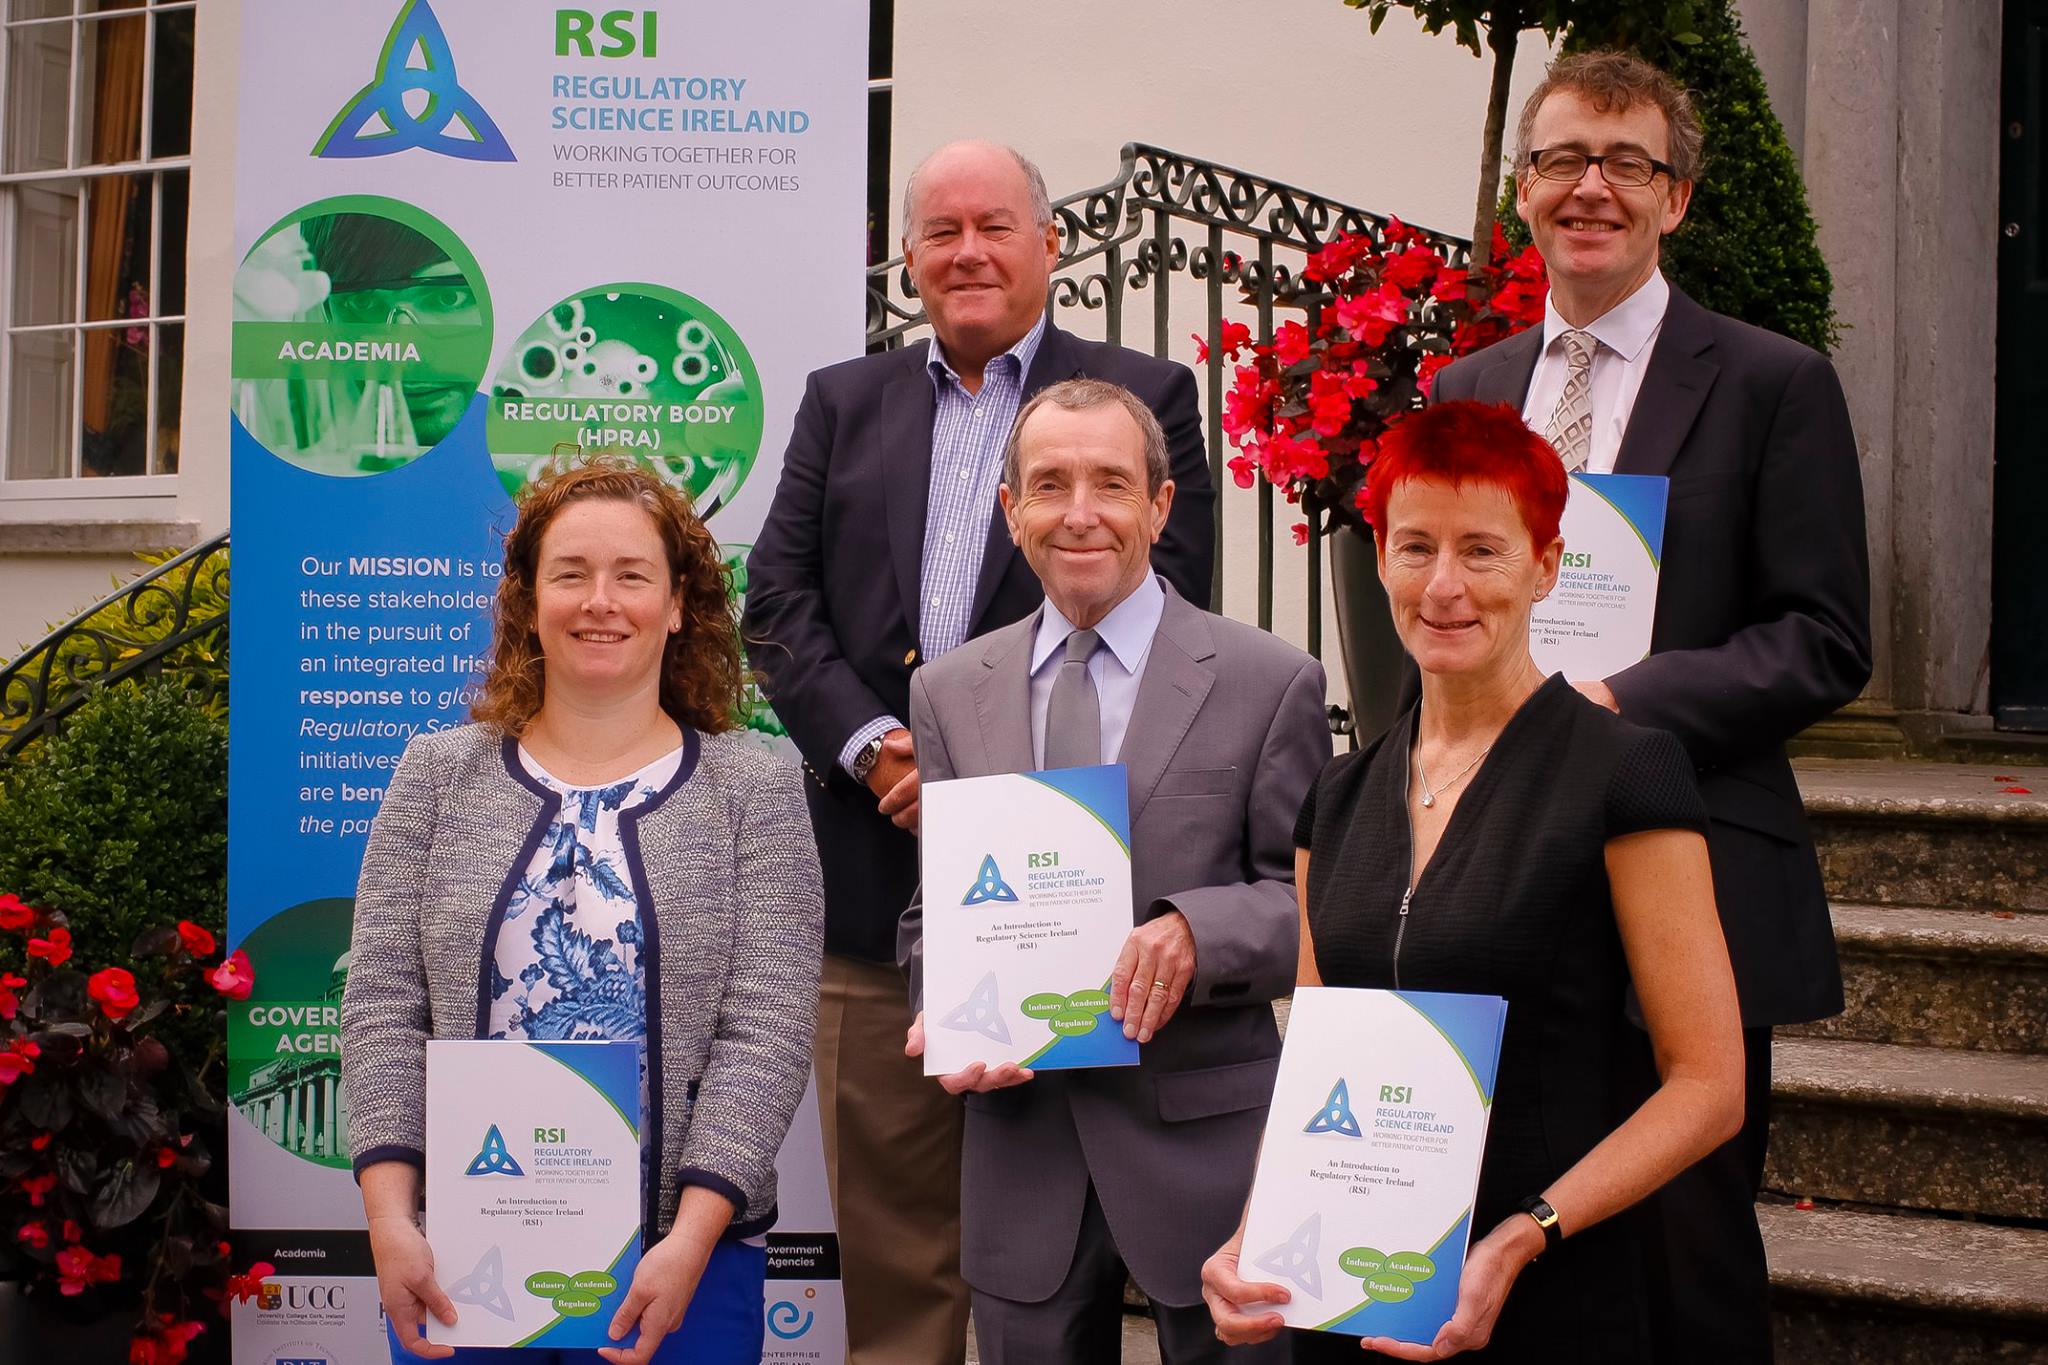 Regulatory Science Ireland connects with Cork Pharmaceutical Industry